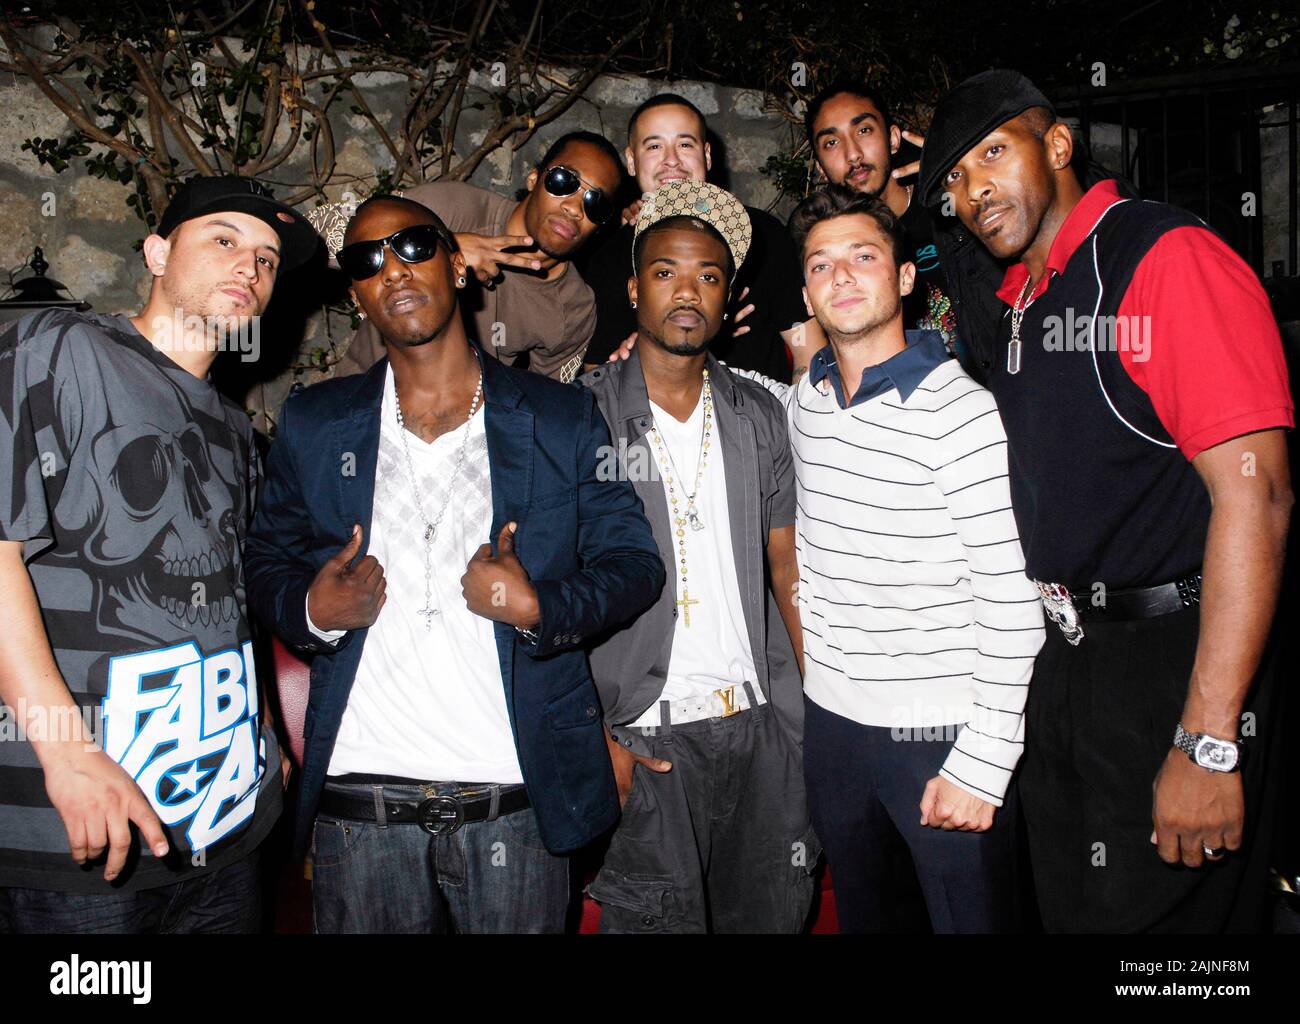 DJ Dre Sinatra, Rapper Shorty Mack, Young Buck, Ray J, Prince and guest at Les Deux on July 1, 2010 in Los Angeles, California. Stock Photo